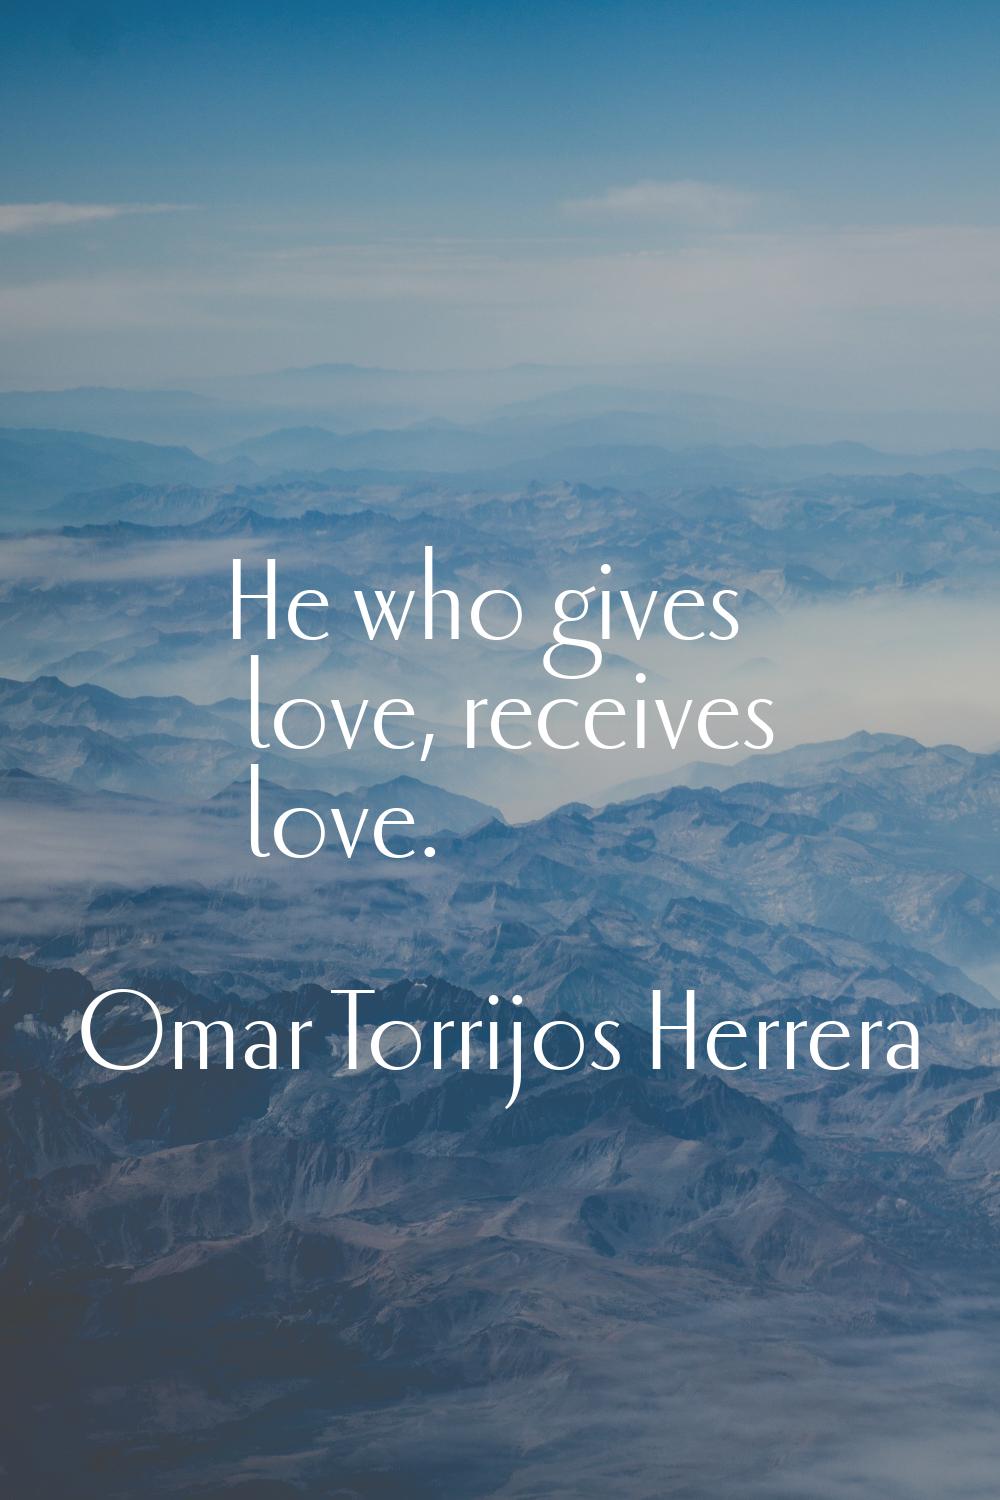 He who gives love, receives love.